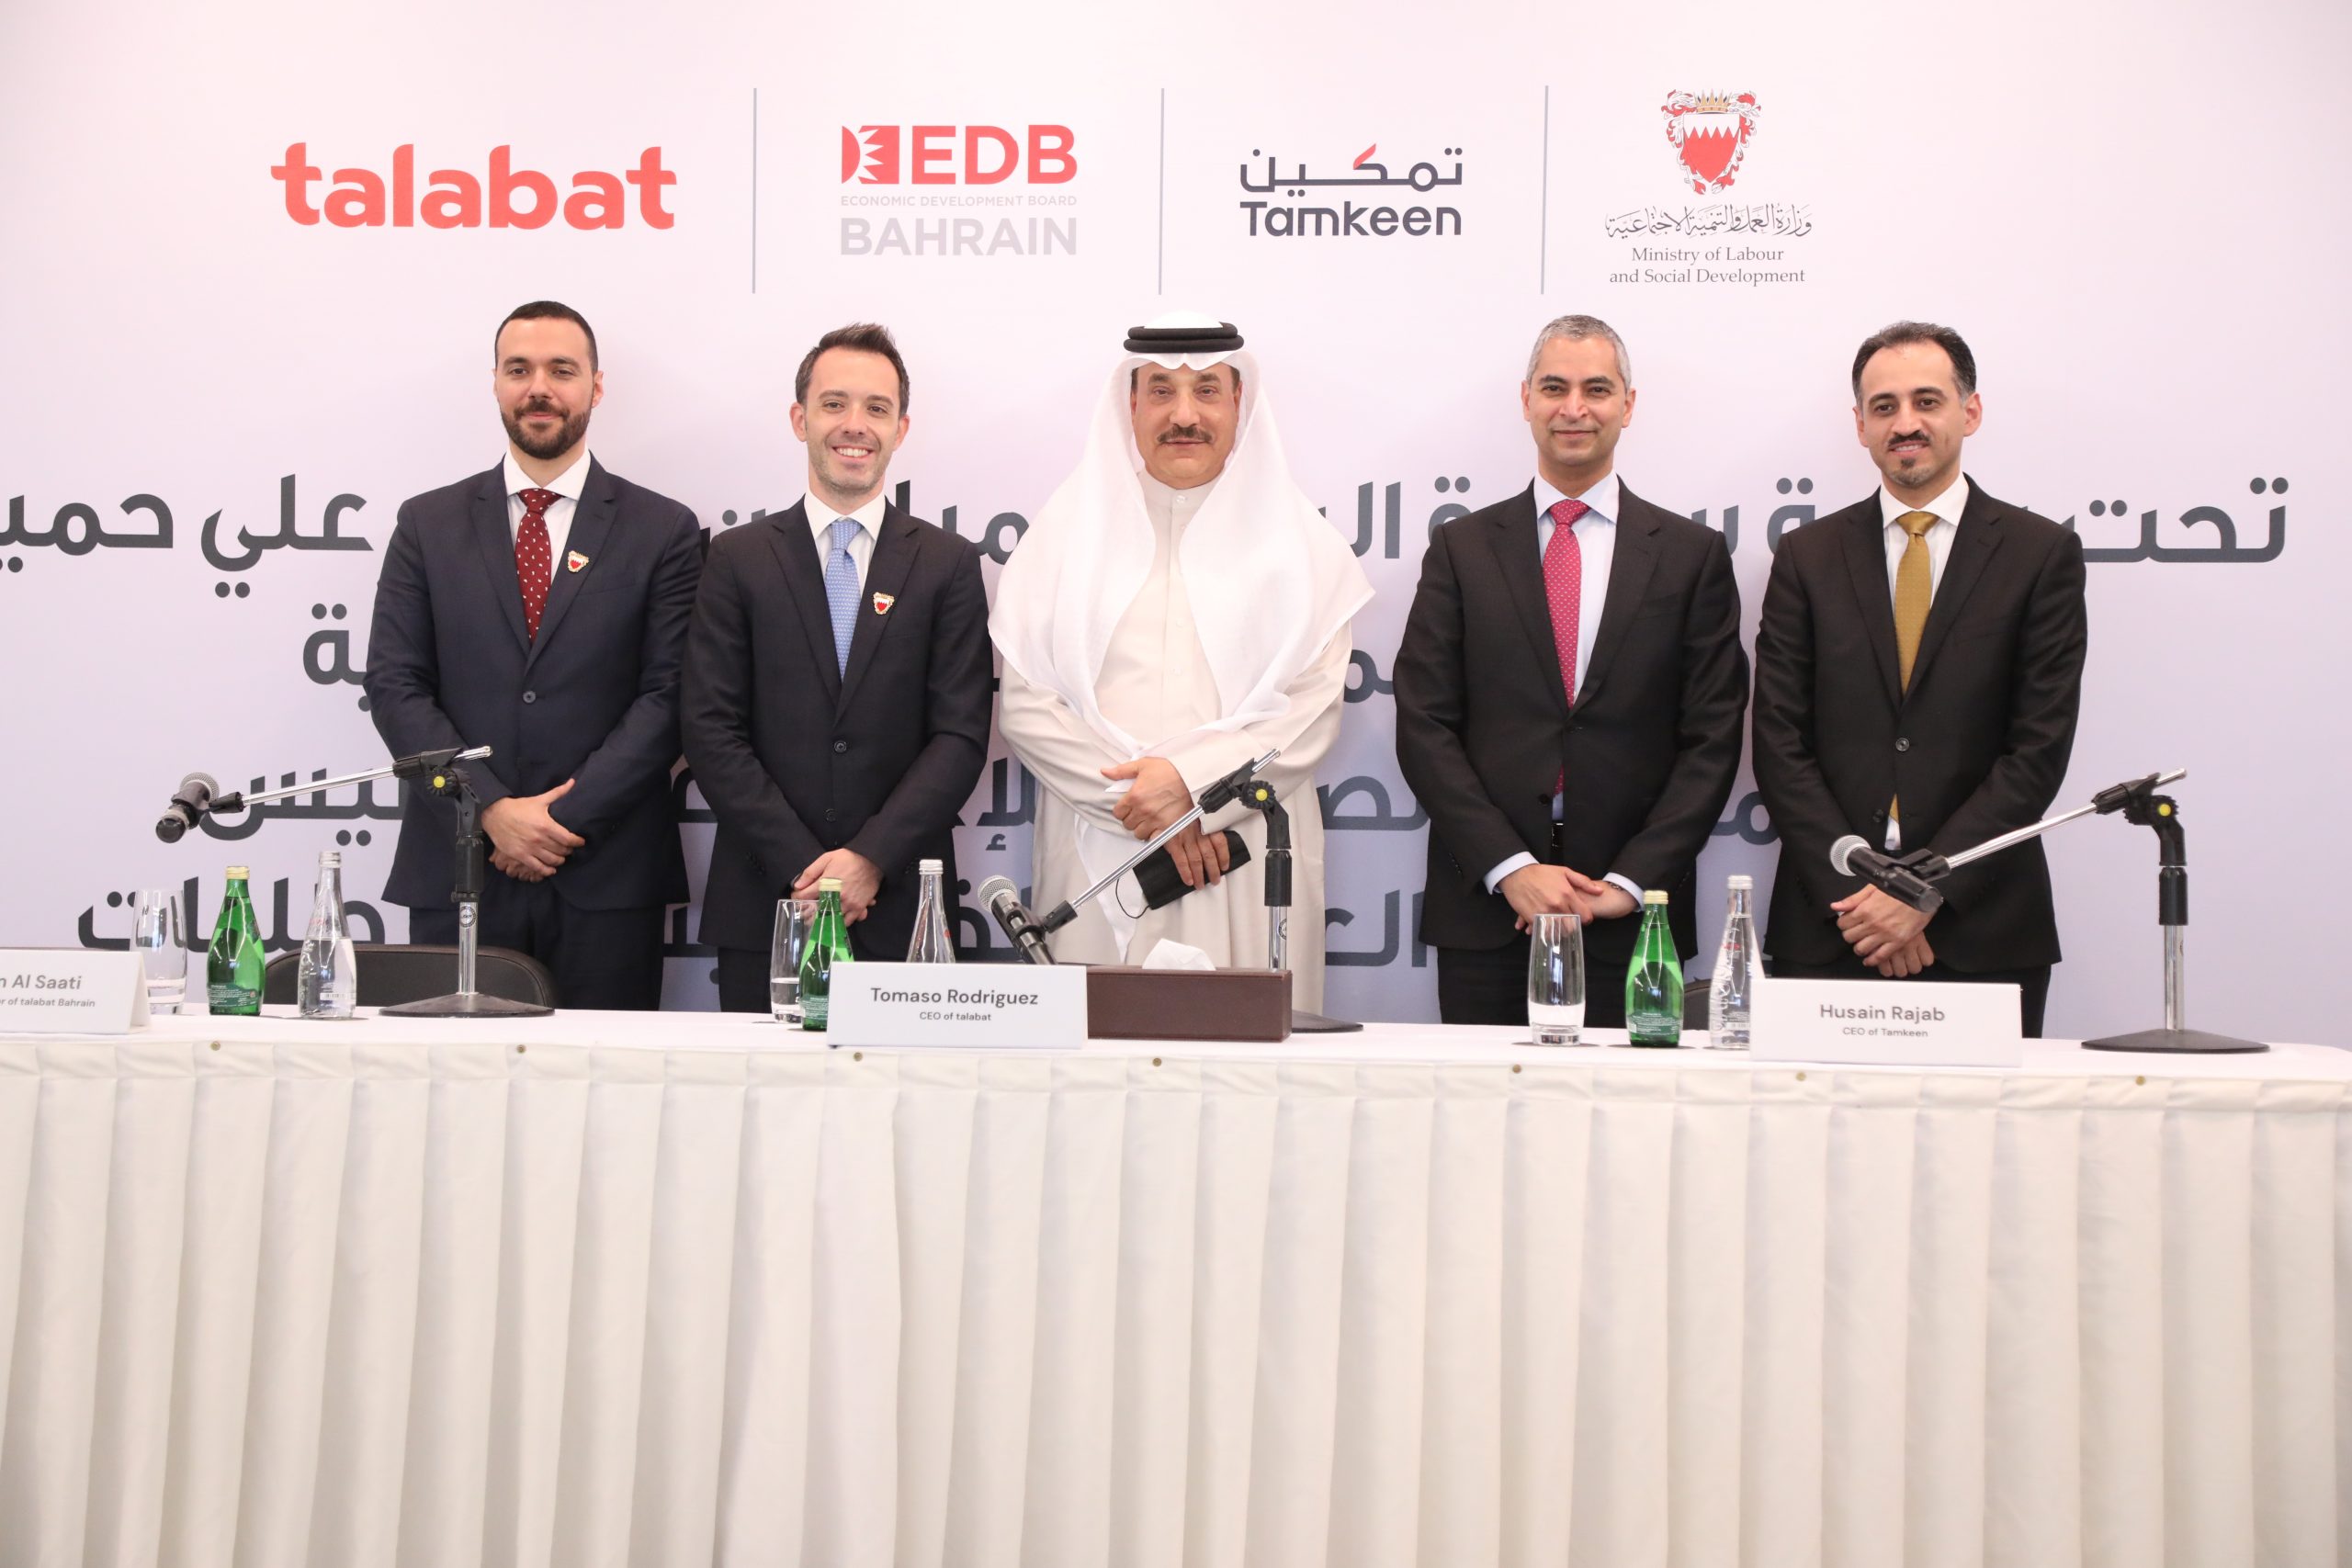 Under the patronage of H.E. Jameel Ben Mohamed Ali Humaidan: talabat announces the establishment of one of the largest regional local shared services centers in Bahrain, providing 1,000 jobs in Bahraini’s